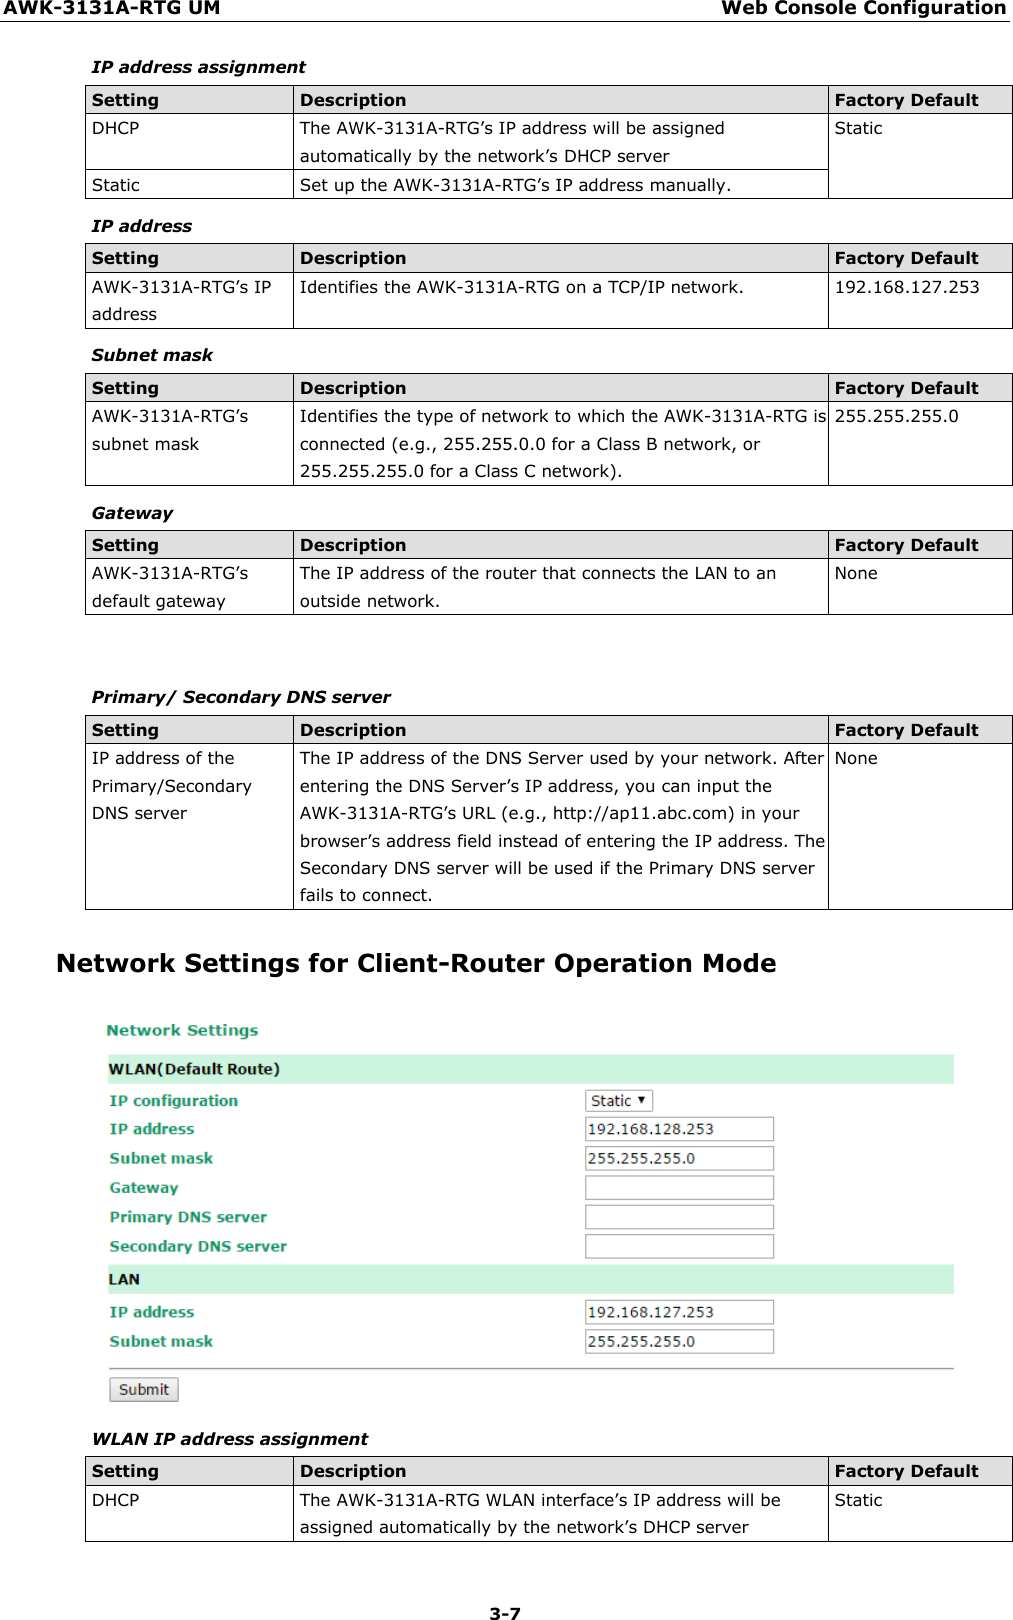 AWK-3131A-RTG UM Web Console Configuration 3-7    IP address assignment  Setting Description Factory Default DHCP The AWK-3131A-RTG’s IP address will be assigned automatically by the network’s DHCP server Static Static Set up the AWK-3131A-RTG’s IP address manually. IP address  Setting Description Factory Default AWK-3131A-RTG’s IP address Identifies the AWK-3131A-RTG on a TCP/IP network. 192.168.127.253 Subnet mask  Setting Description Factory Default AWK-3131A-RTG’s subnet mask Identifies the type of network to which the AWK-3131A-RTG is connected (e.g., 255.255.0.0 for a Class B network, or 255.255.255.0 for a Class C network). 255.255.255.0 Gateway  Setting Description Factory Default AWK-3131A-RTG’s default gateway The IP address of the router that connects the LAN to an outside network. None    Primary/ Secondary DNS server  Setting Description Factory Default IP address of the Primary/Secondary DNS server The IP address of the DNS Server used by your network. After entering the DNS Server’s IP address, you can input the AWK-3131A-RTG’s URL (e.g., http://ap11.abc.com) in your browser’s address field instead of entering the IP address. The Secondary DNS server will be used if the Primary DNS server fails to connect. None  Network Settings for Client-Router Operation Mode    WLAN IP address assignment  Setting Description Factory Default DHCP The AWK-3131A-RTG WLAN interface’s IP address will be assigned automatically by the network’s DHCP server Static 